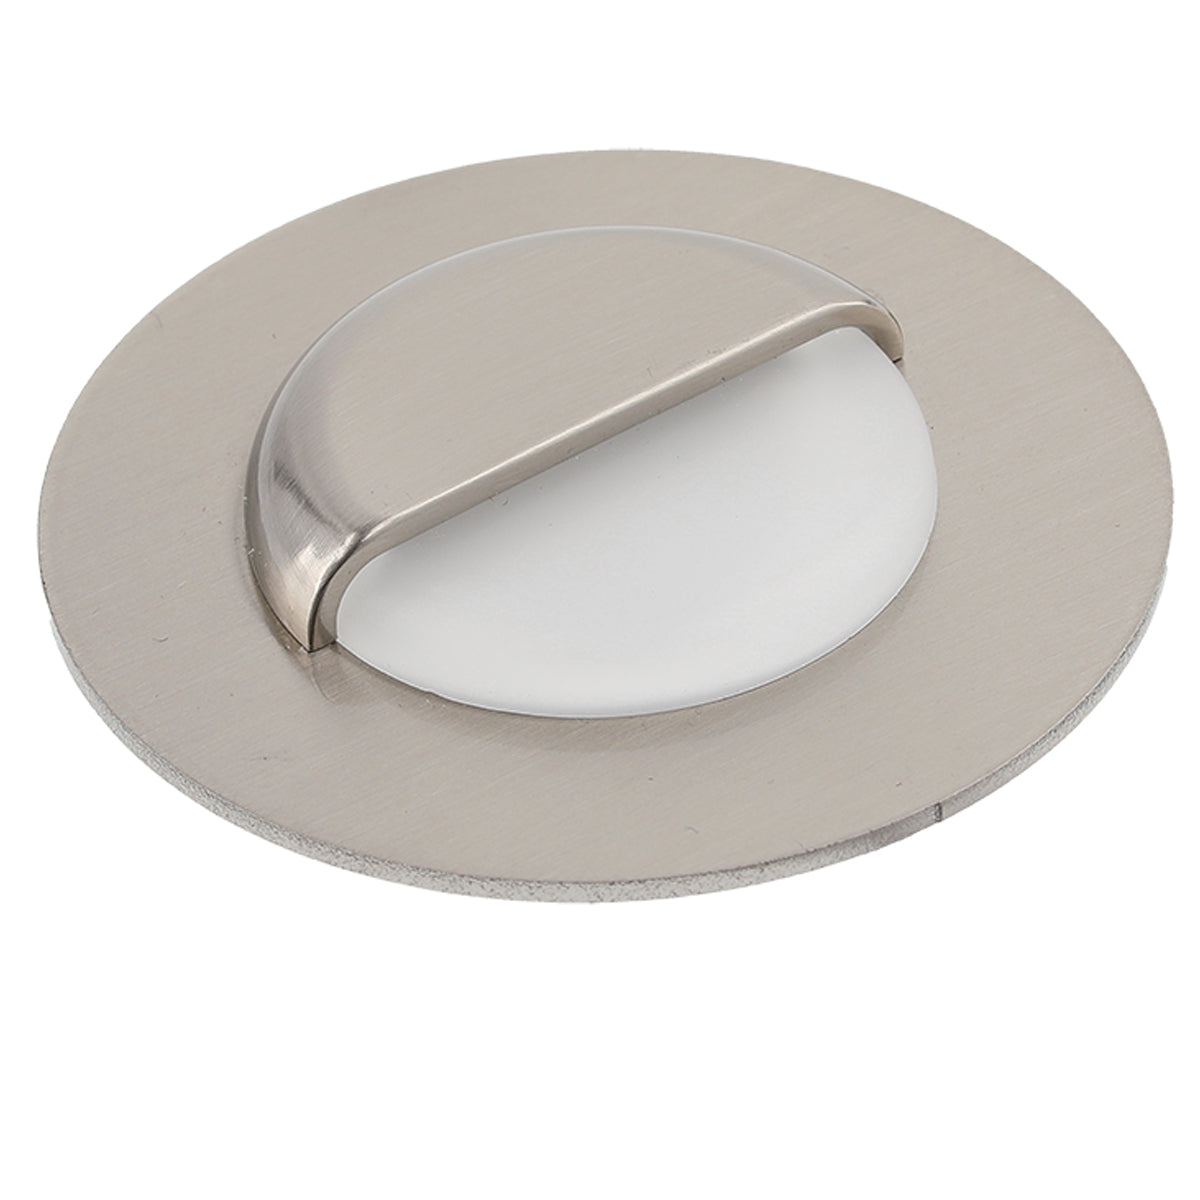 Casey is a small led light  that can be mounted on the wall or even the floor. Ideal for stair lighting. It is made of stainless steel and finished with an opal diffuser. It has an IP20 protection which means it is dustproof. Intended for indoor use.